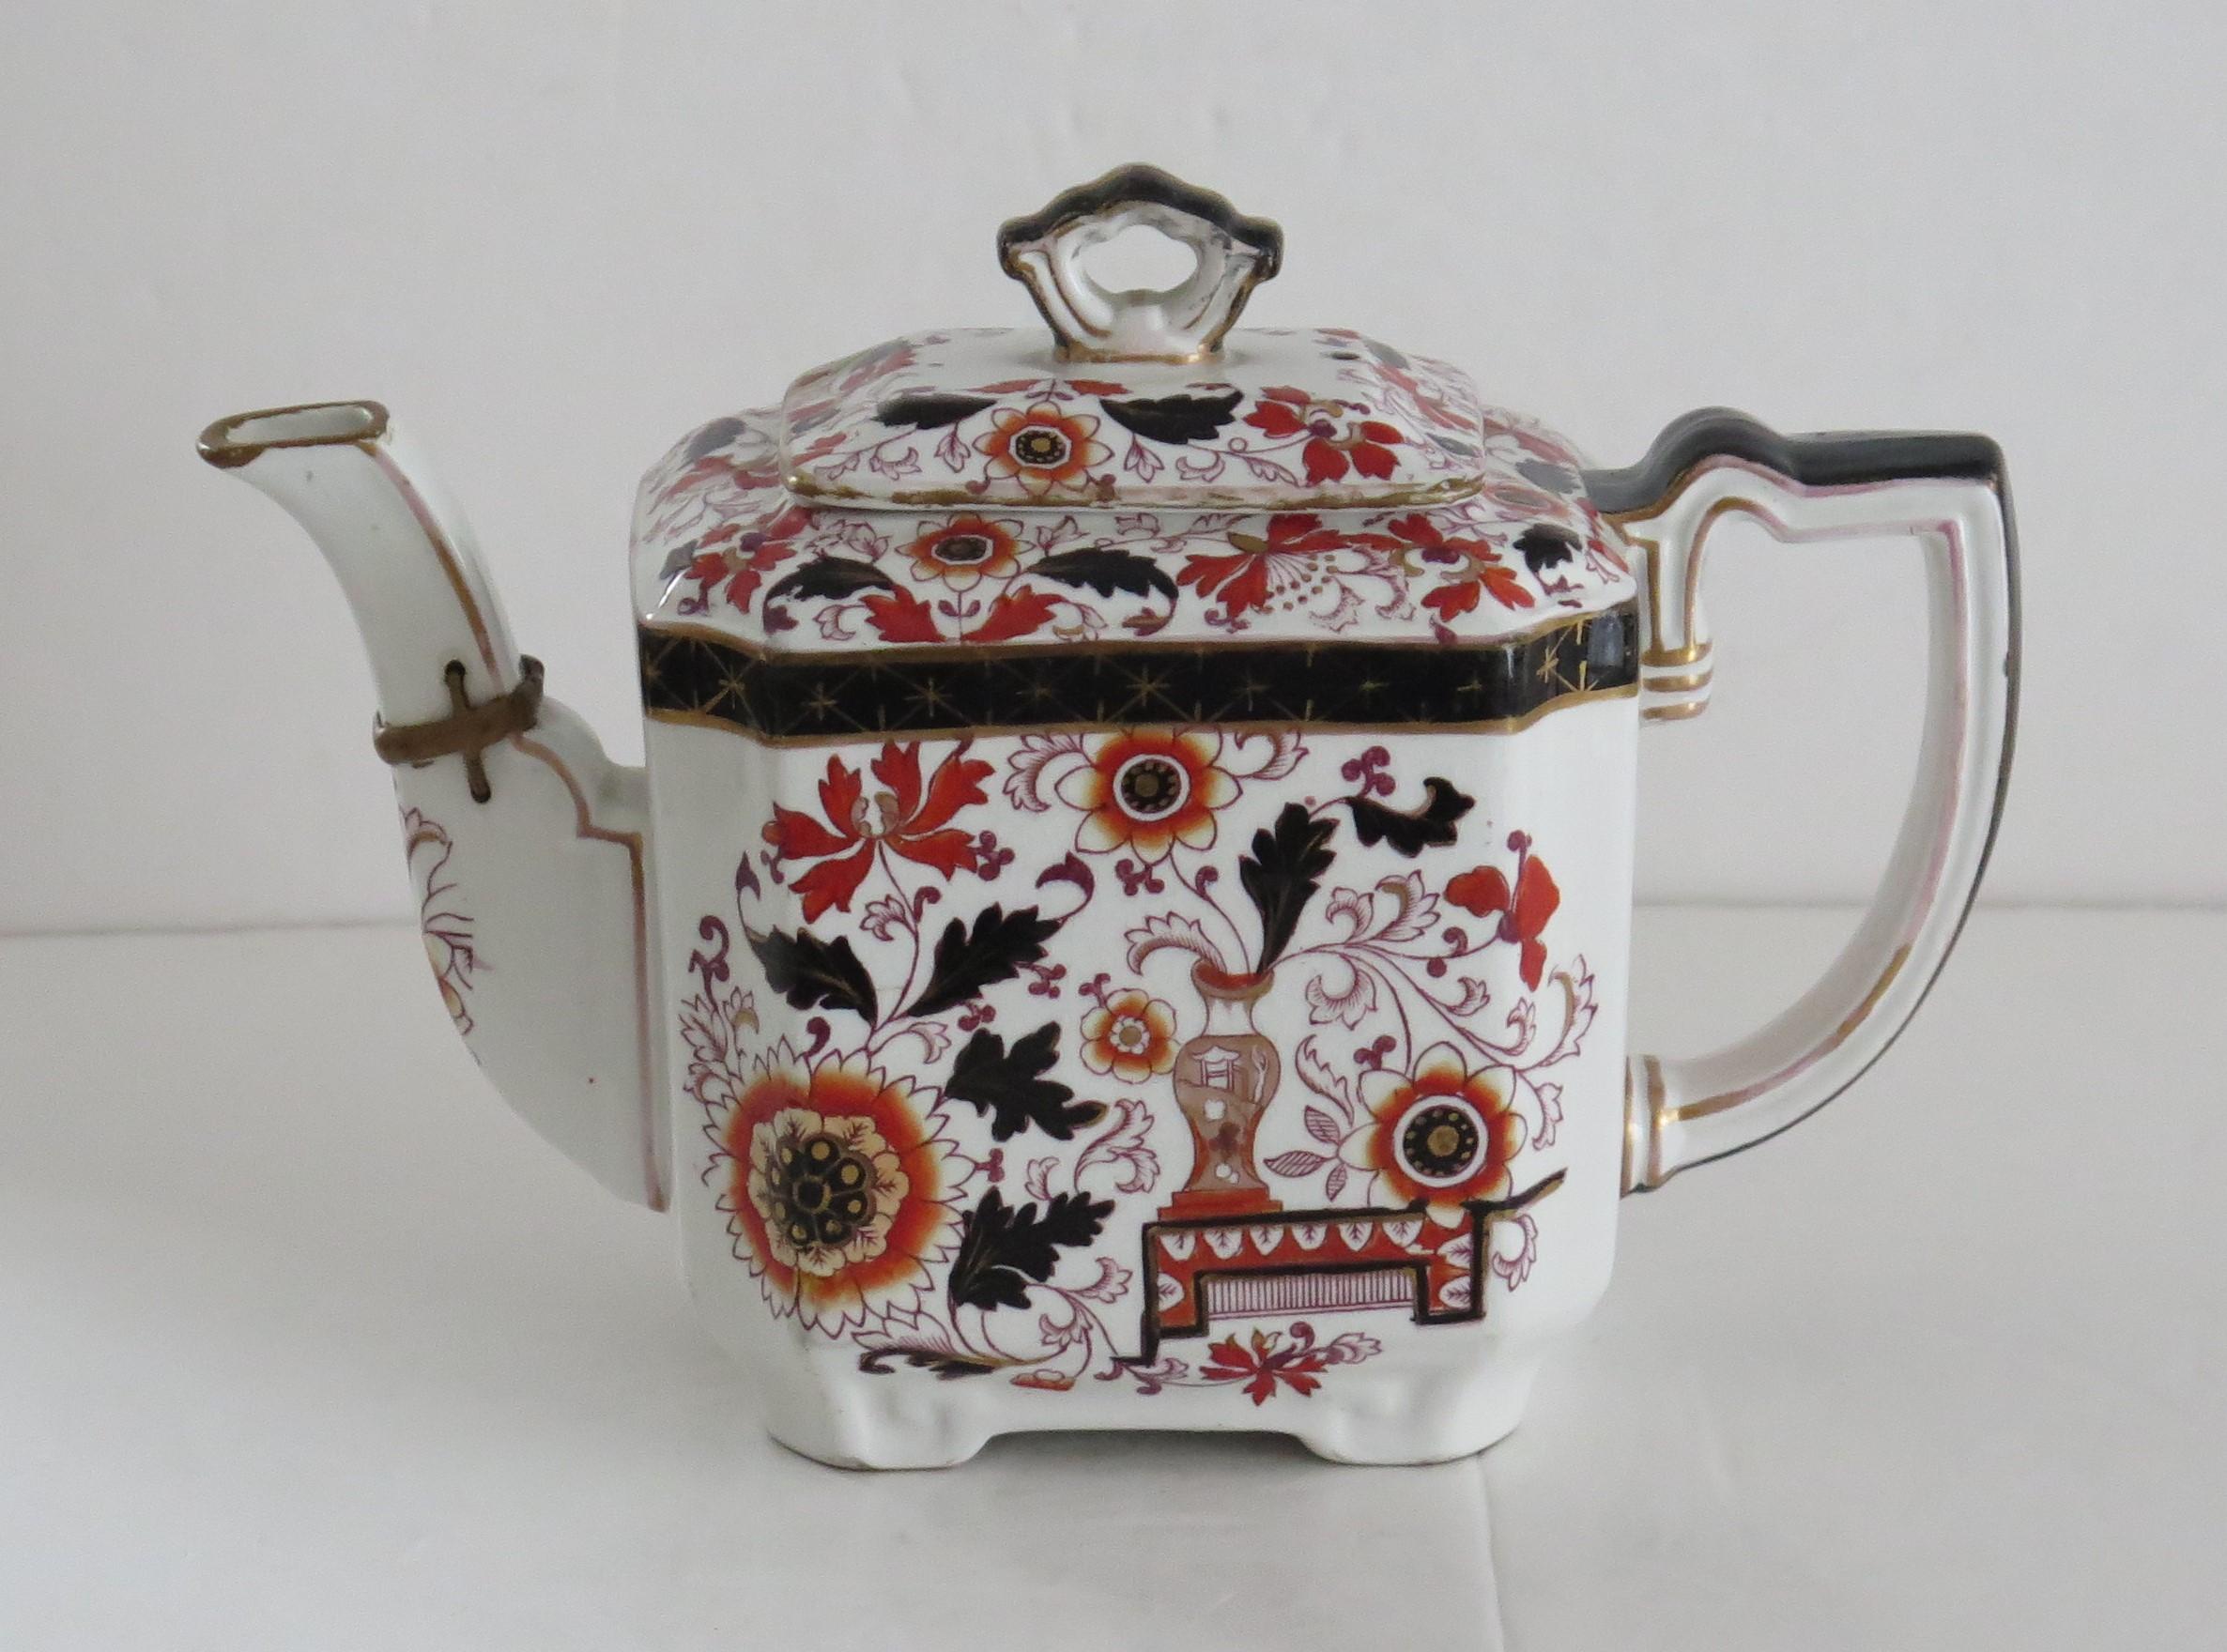 This is a beautiful Teapot made by Mason's Ironstone during the mid-19th century, when Mason's was owned by Ashworth Brothers, circa 1870.

It has a Chinoiserie pattern called 